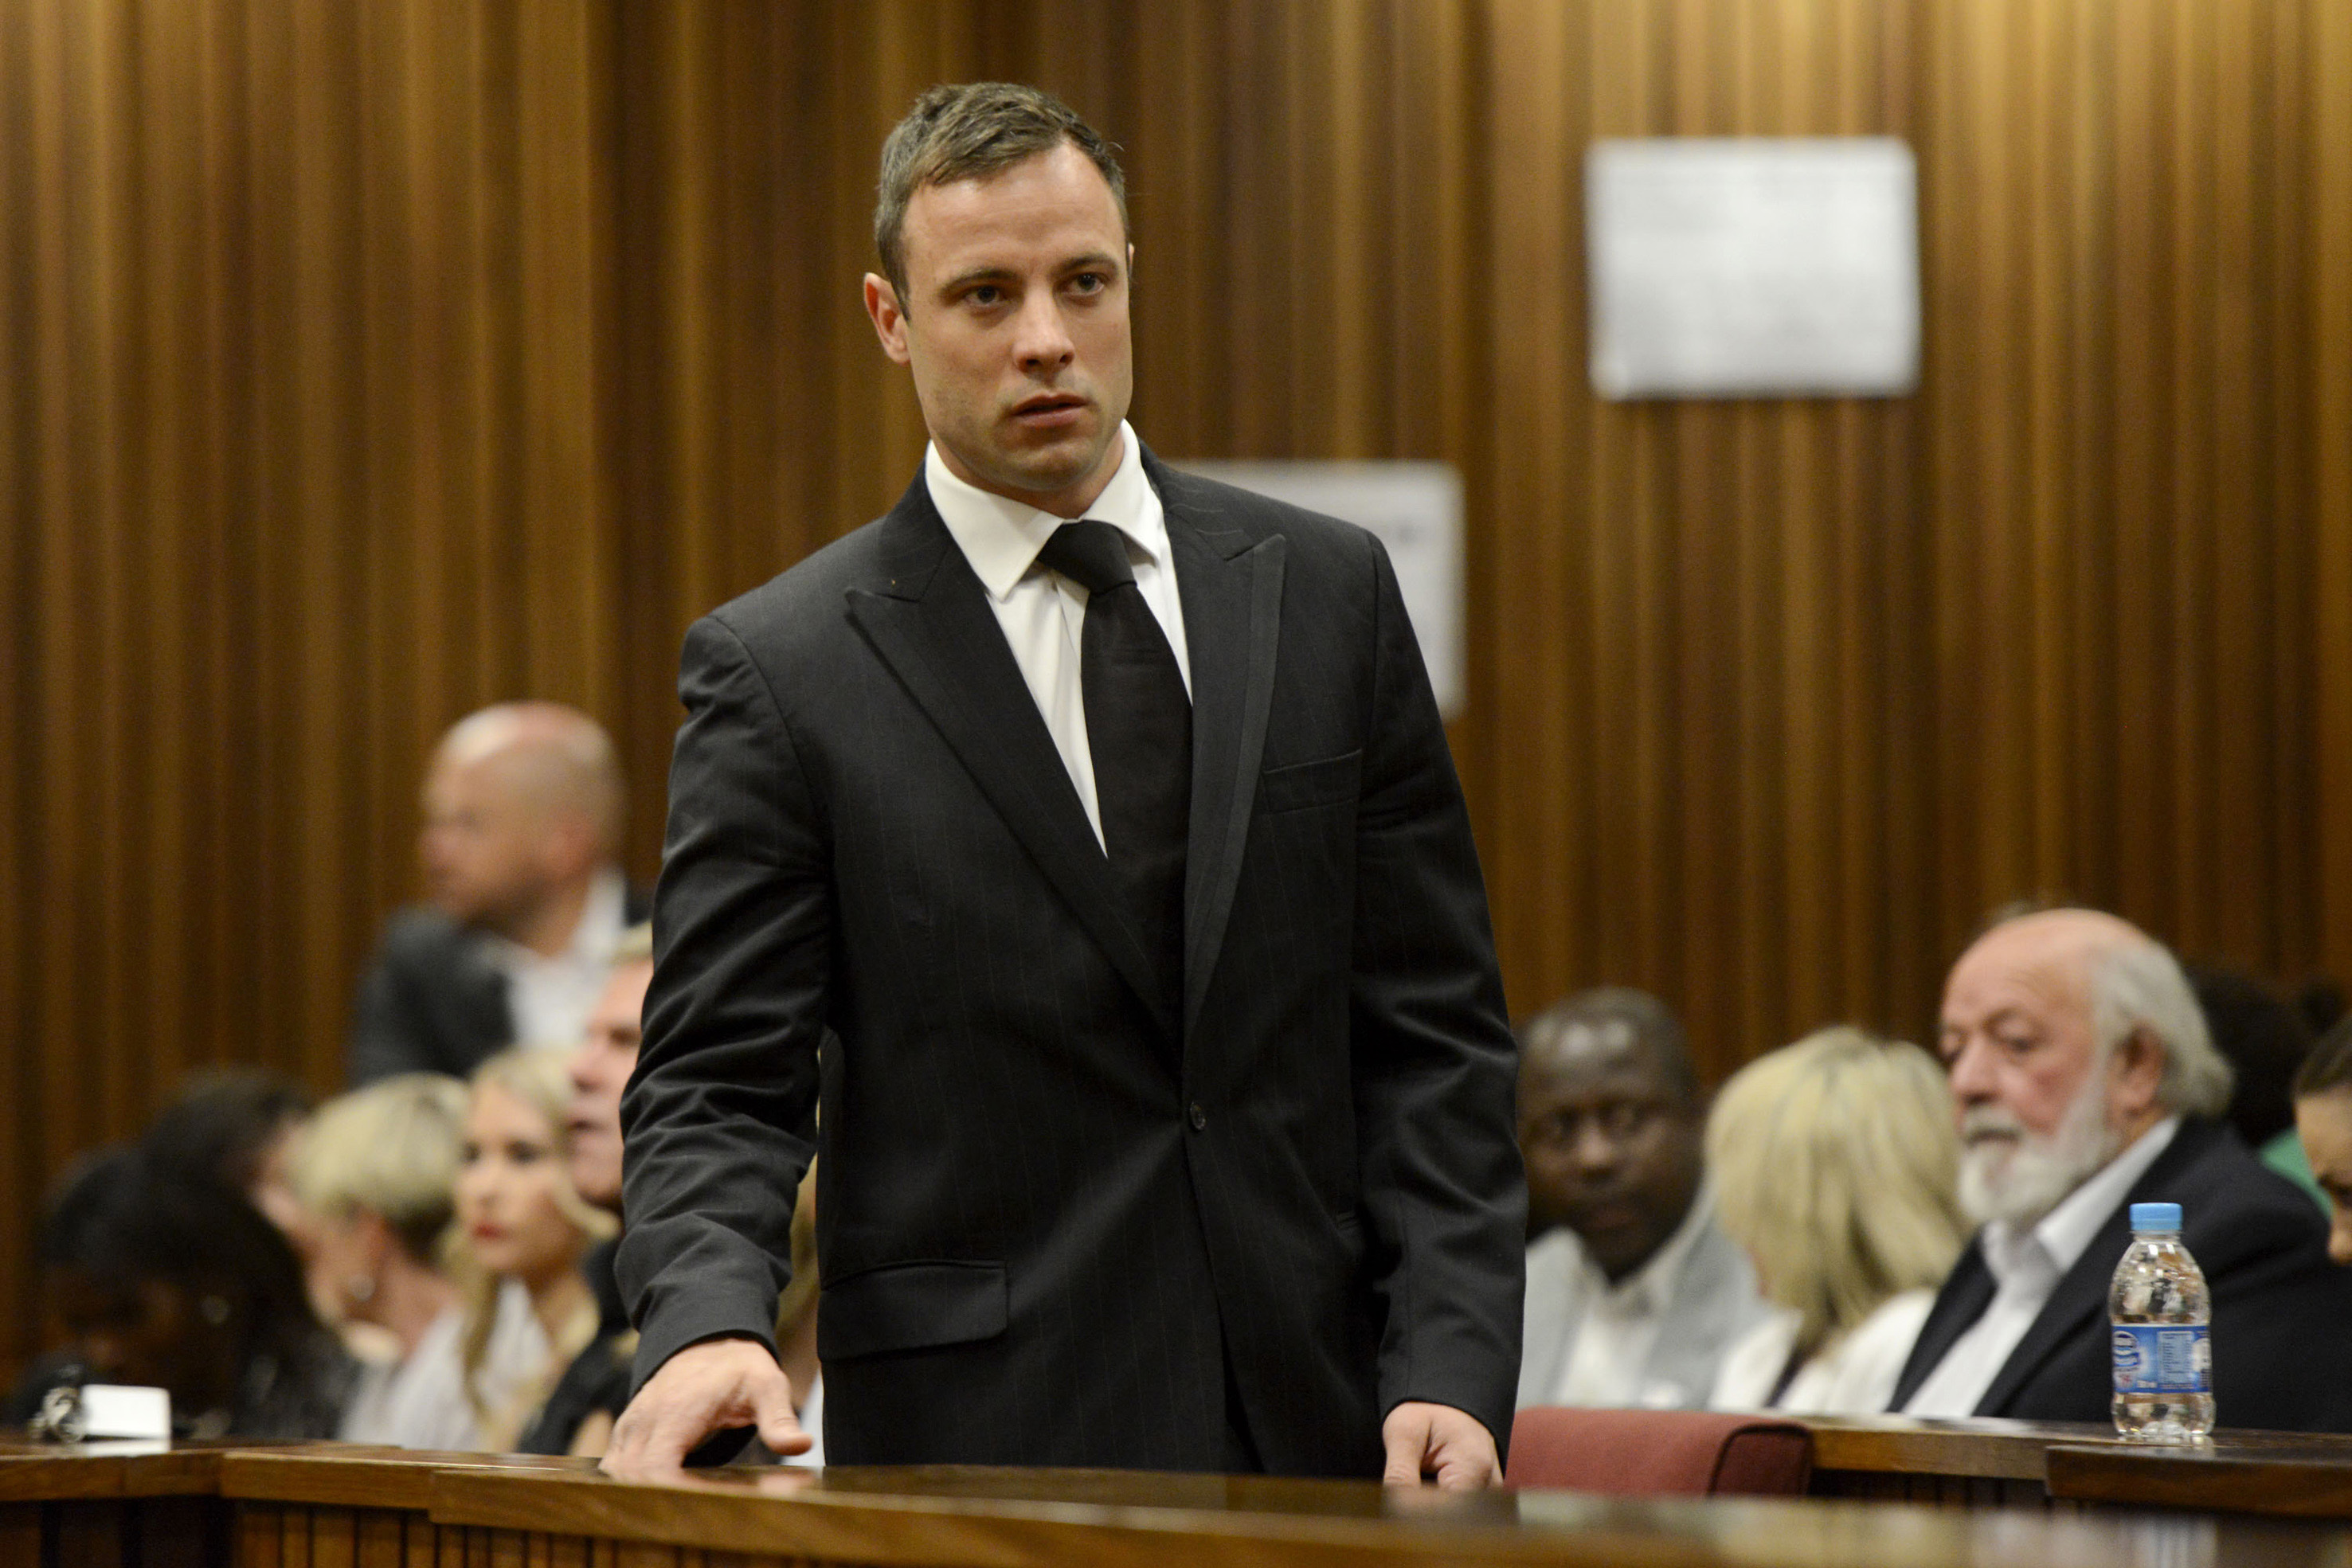 South African Olympic and Paralympic track star Oscar Pistorius attends his sentencing at the North Gauteng High Court in Pretoria